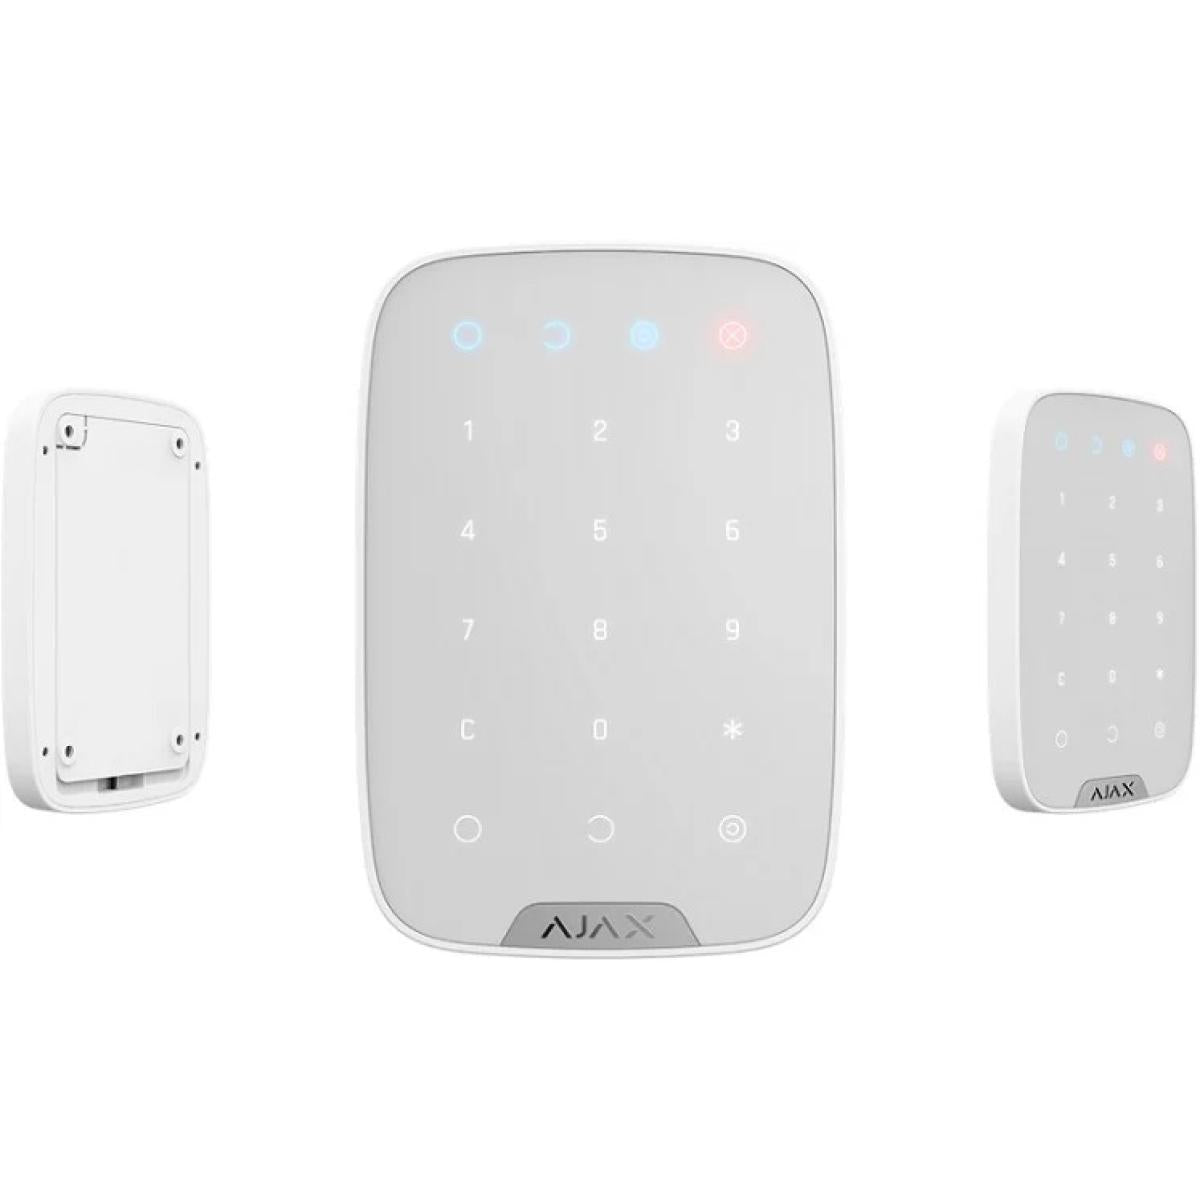 Ajax Keypad Plus Wireless touch keypad supporting encrypted contactless cards and key fobs White